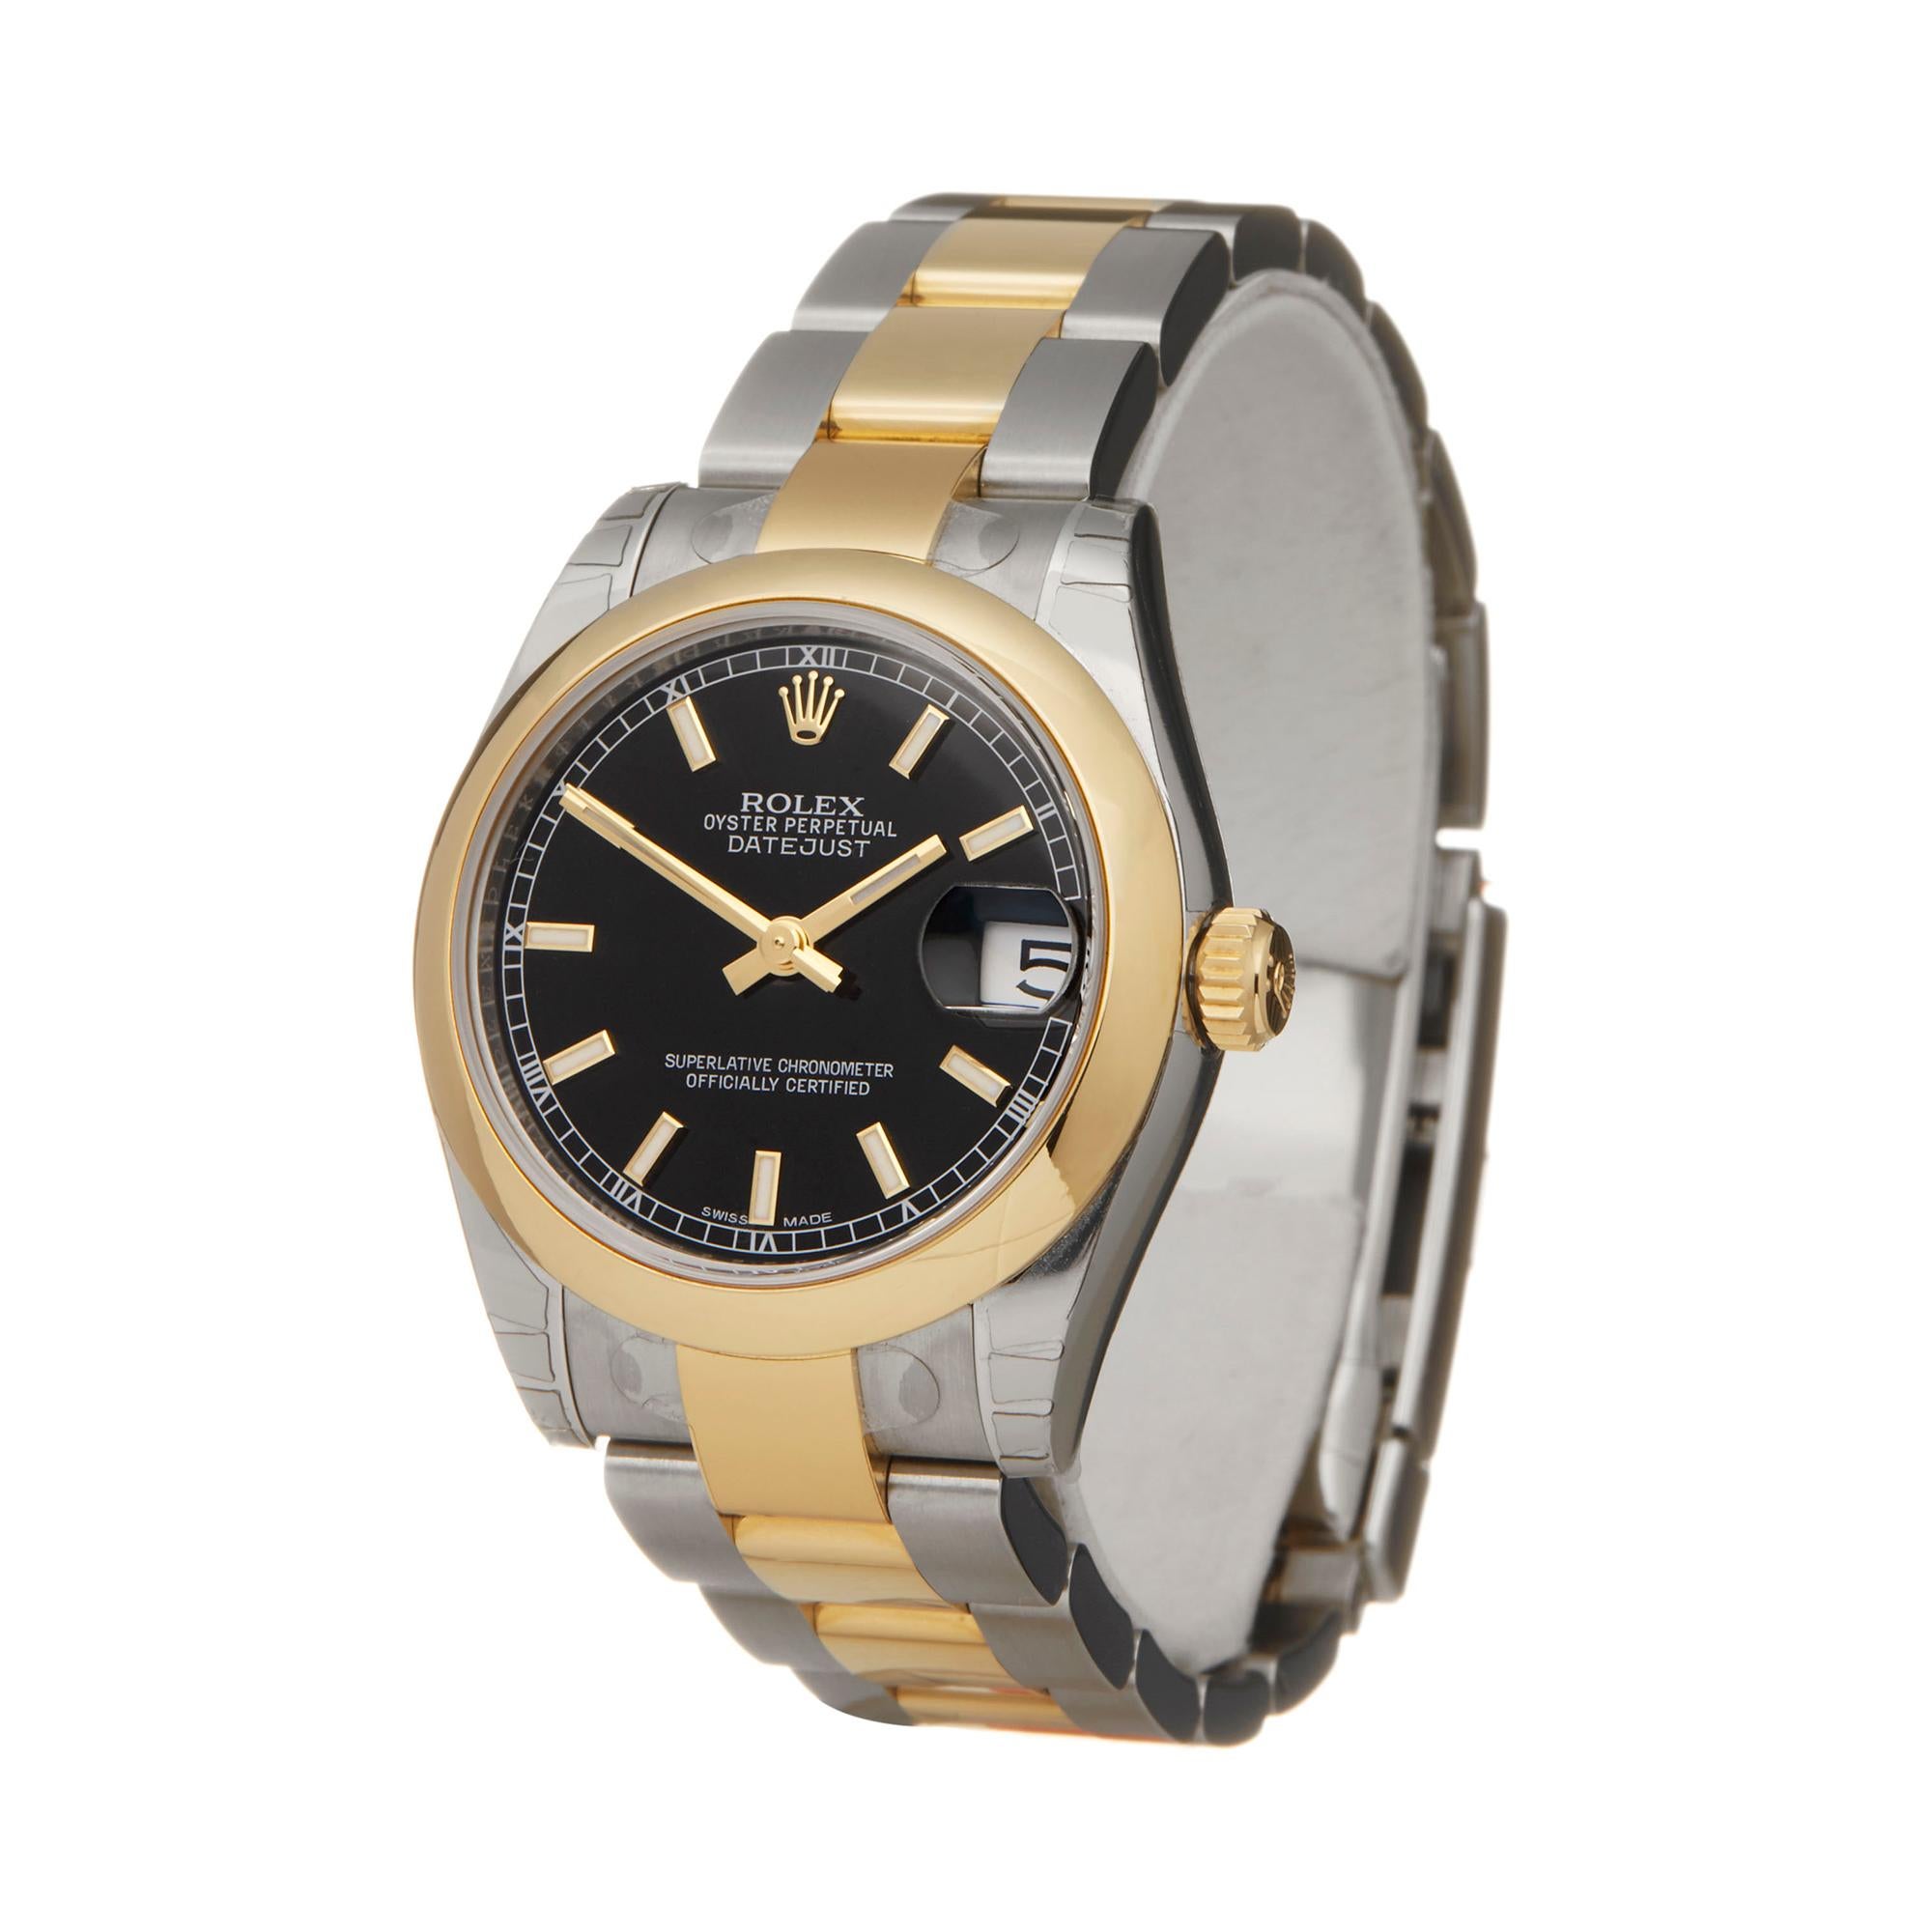 Ref: COM2214
Manufacturer: Rolex
Model: DateJust
Model Ref: 178243
Age: 18th March 2019
Gender: Ladies
Complete With: Box, Manuals & Guarantee
Dial: Black Baton
Glass: Sapphire Crystal
Movement: Automatic
Water Resistance: To Manufacturers